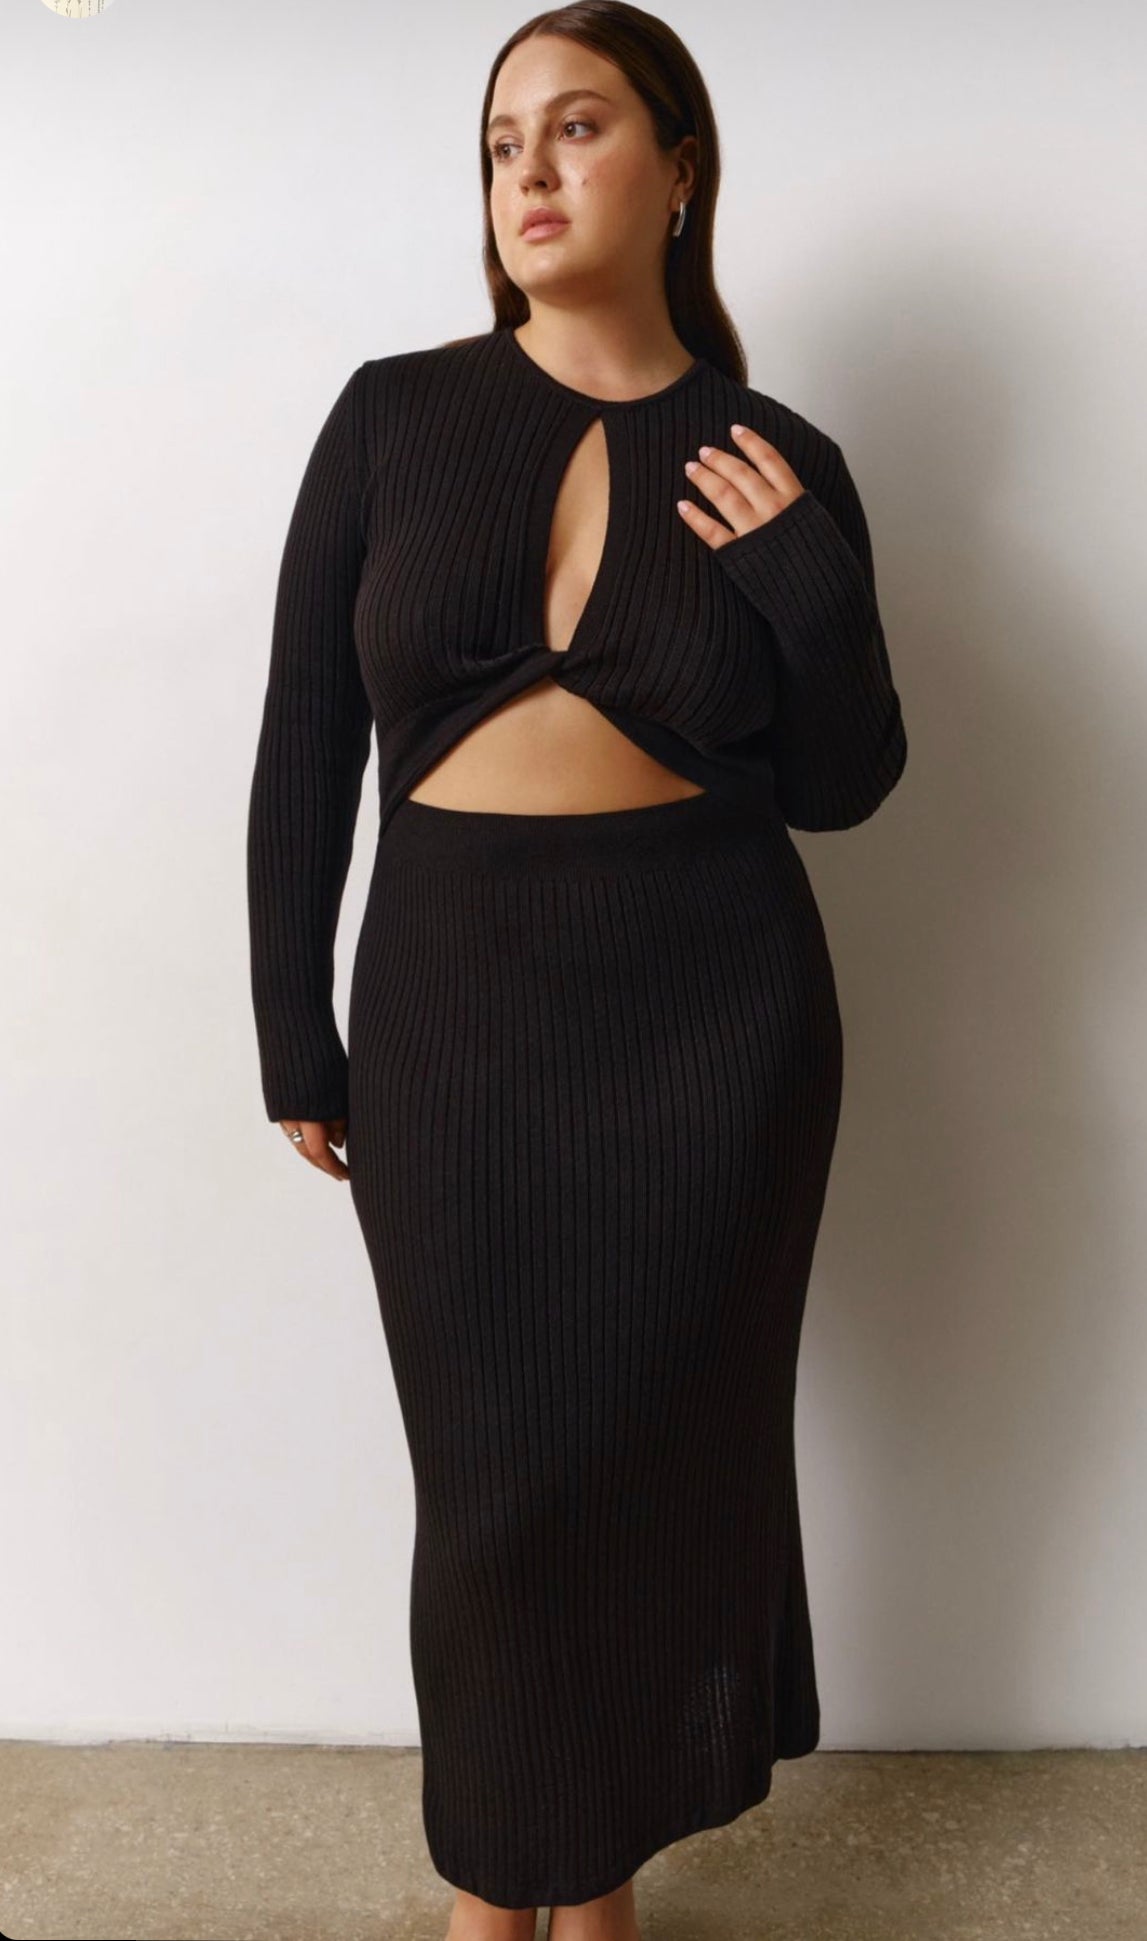 Knitted Dress Maria With A Twist On The Chest Black